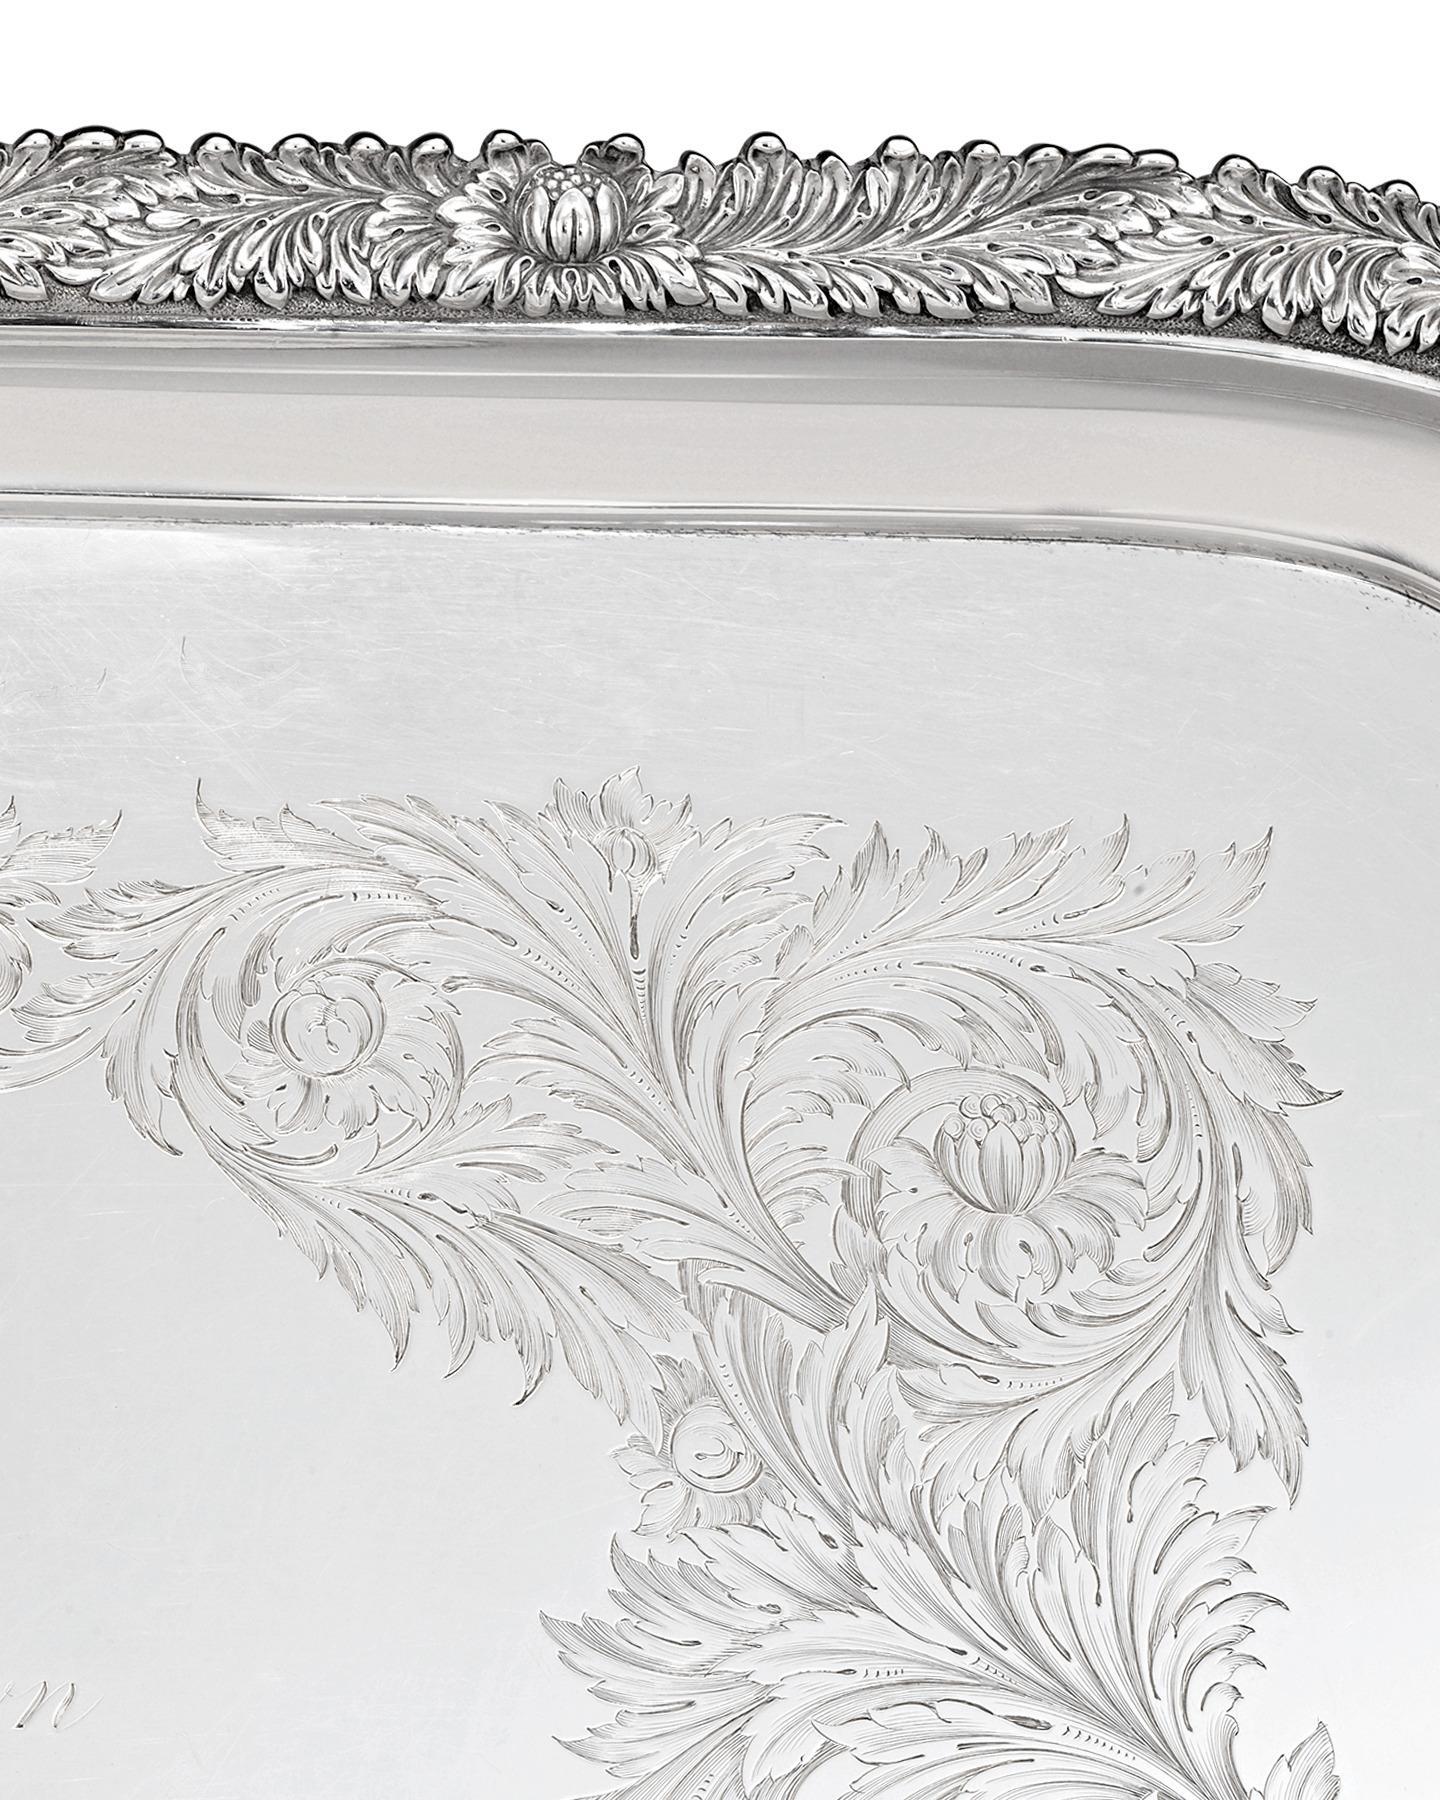 This absolutely monumental sterling silver tea tray by the famed Tiffany & Co. was crafted in the firm's famed Chrysanthemum pattern. This opulent motif's signature flowers are masterfully chased along the tray's border. Furthermore, the body of the